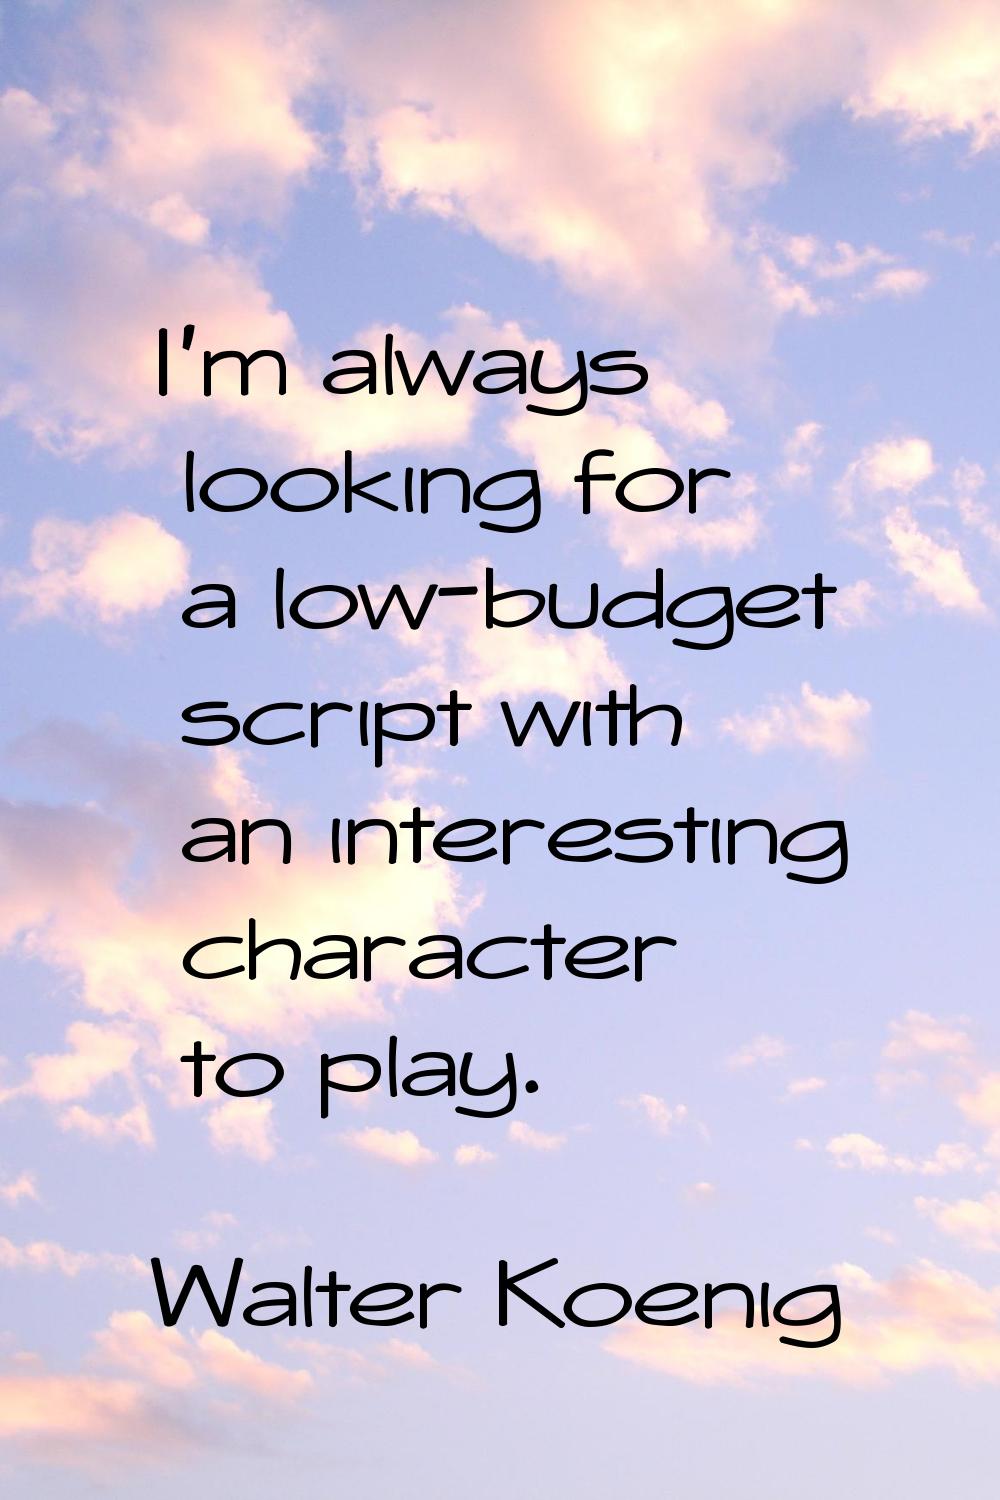 I'm always looking for a low-budget script with an interesting character to play.